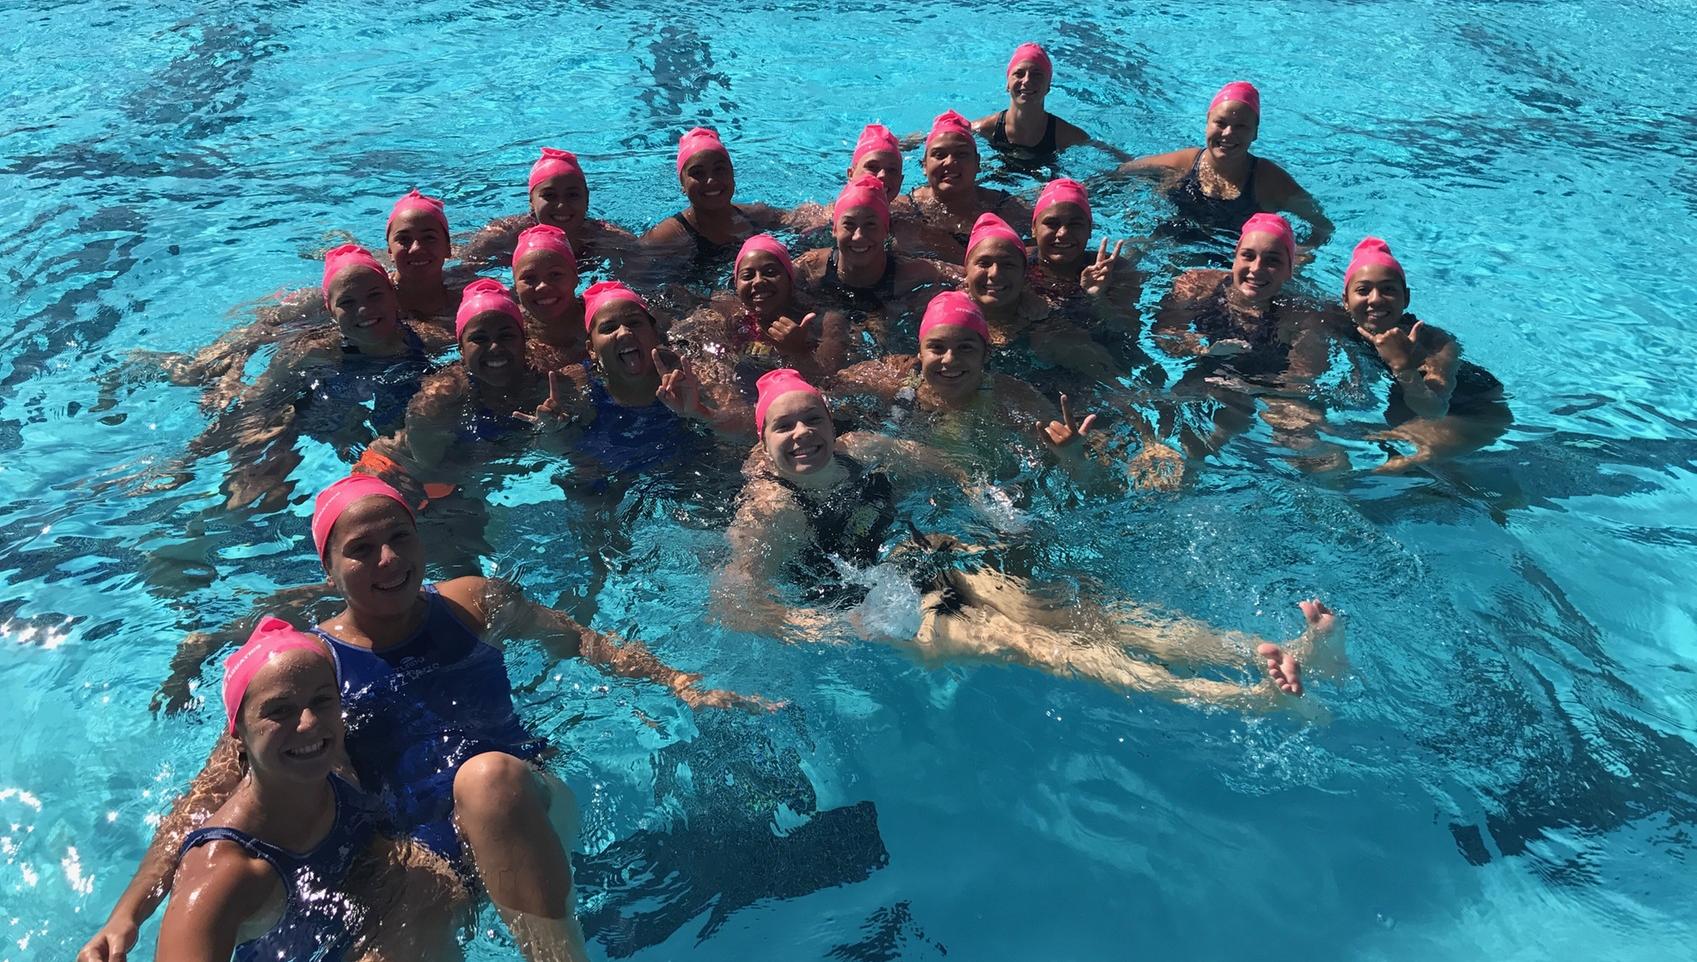 Citrus Women's Polo in their pink caps. Photo credit: Jennifer Spalding